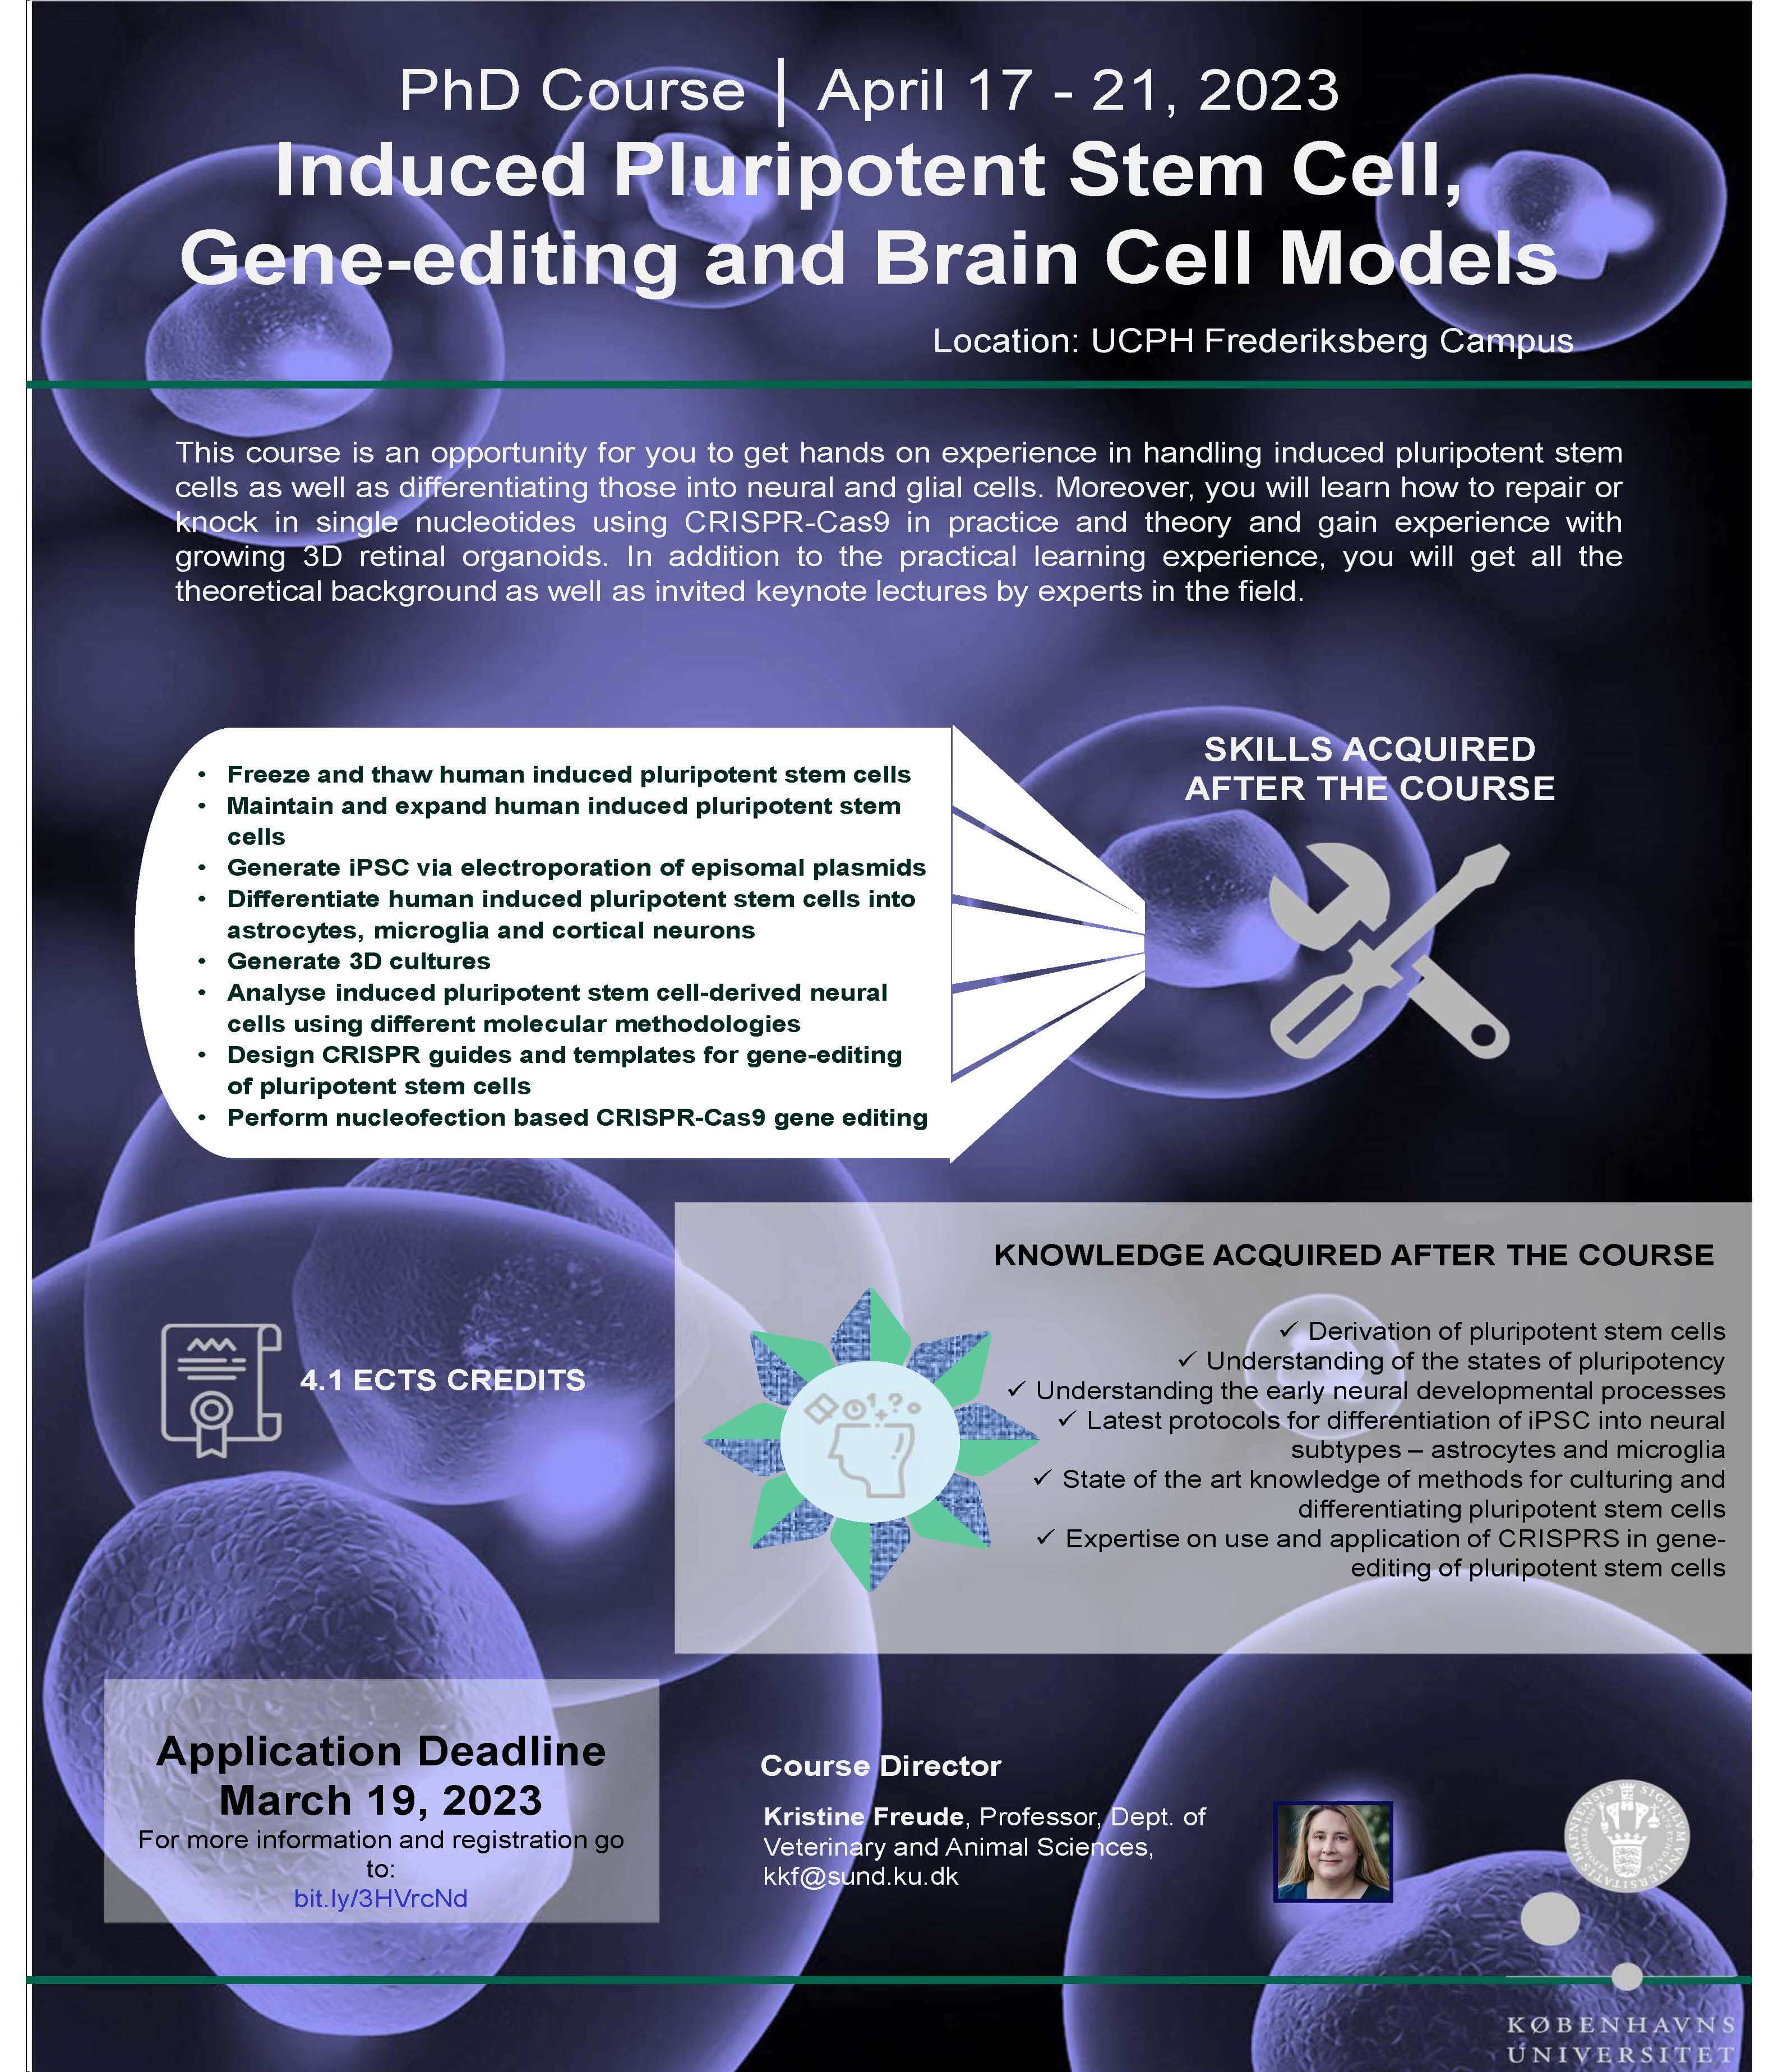 Poster for Induced Pluripotent Stem Cells, Gene-editing and Brain Cell Models 2023